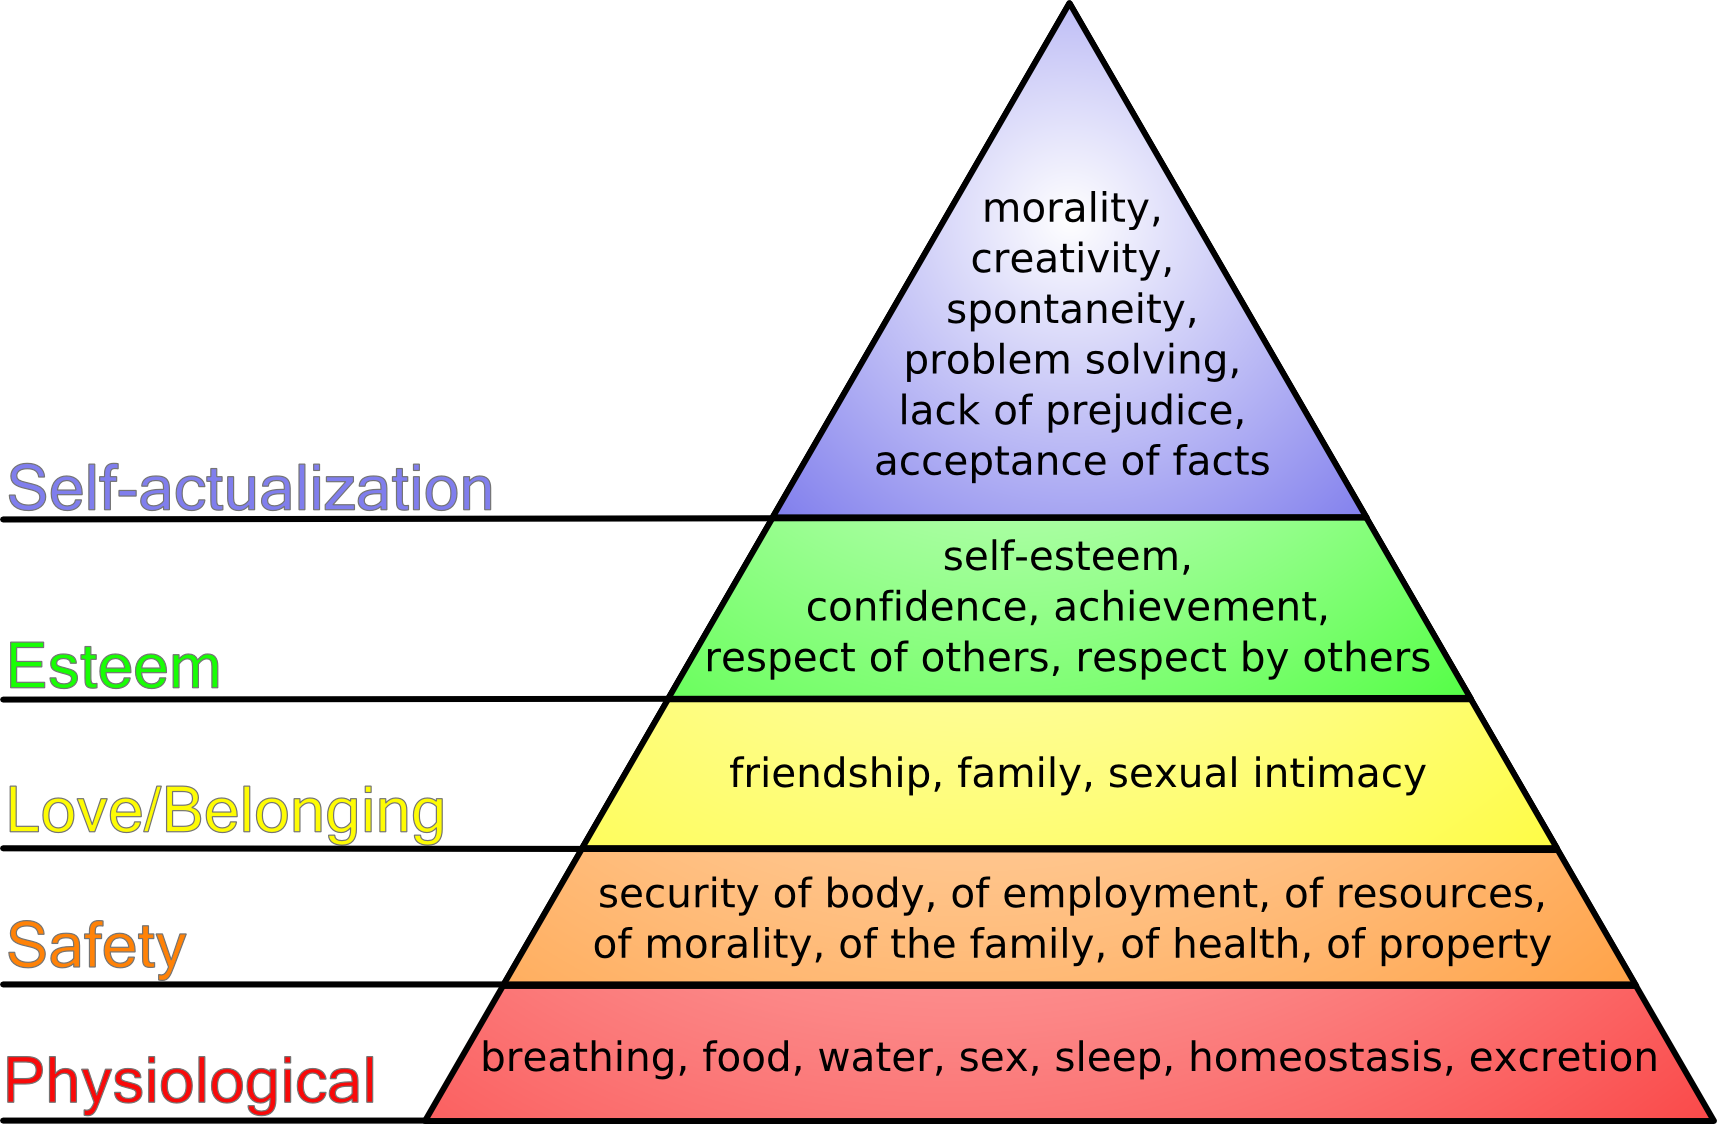 Diagram of a triangle showing Maslow’s Hierarchy of Needs, with Physiological needs at the bottom, then Safety, Love/Belonging, Esteem, and Self-actualization at the top of the pyramid.